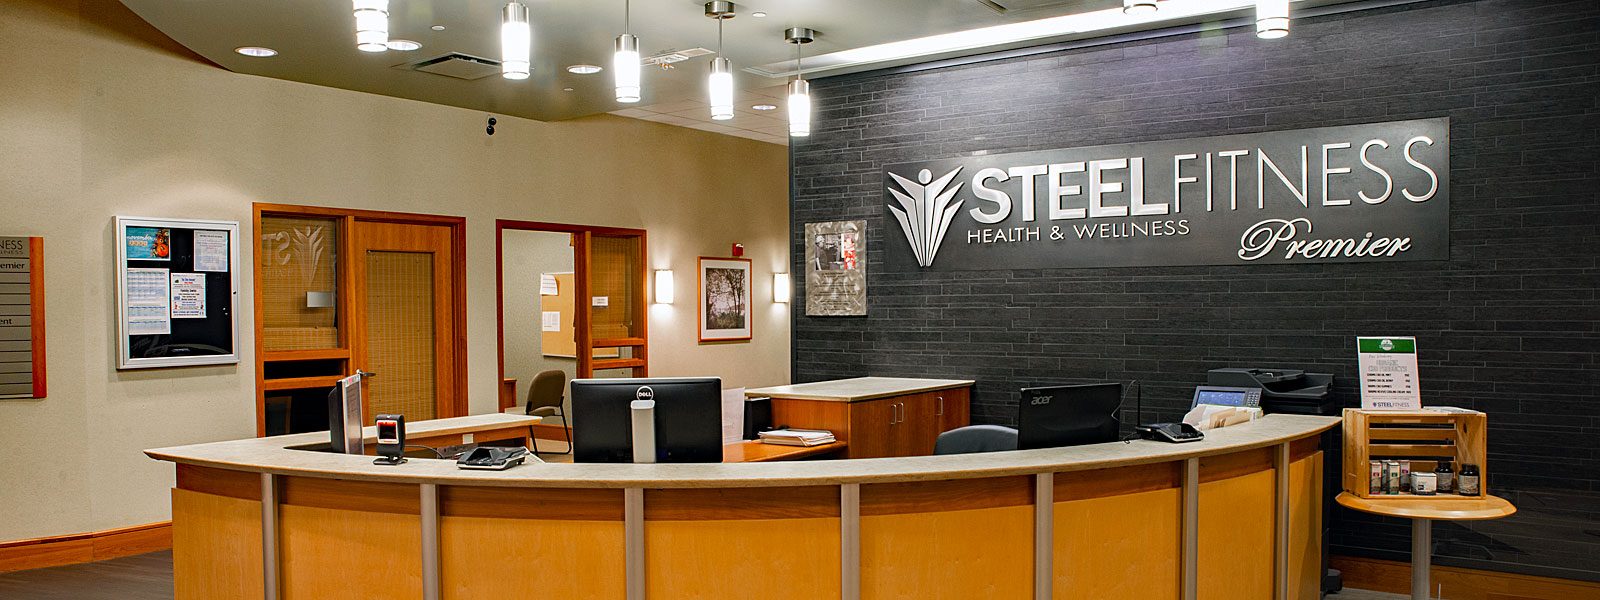 Front desk and lobby at Steel Fitness Premier.